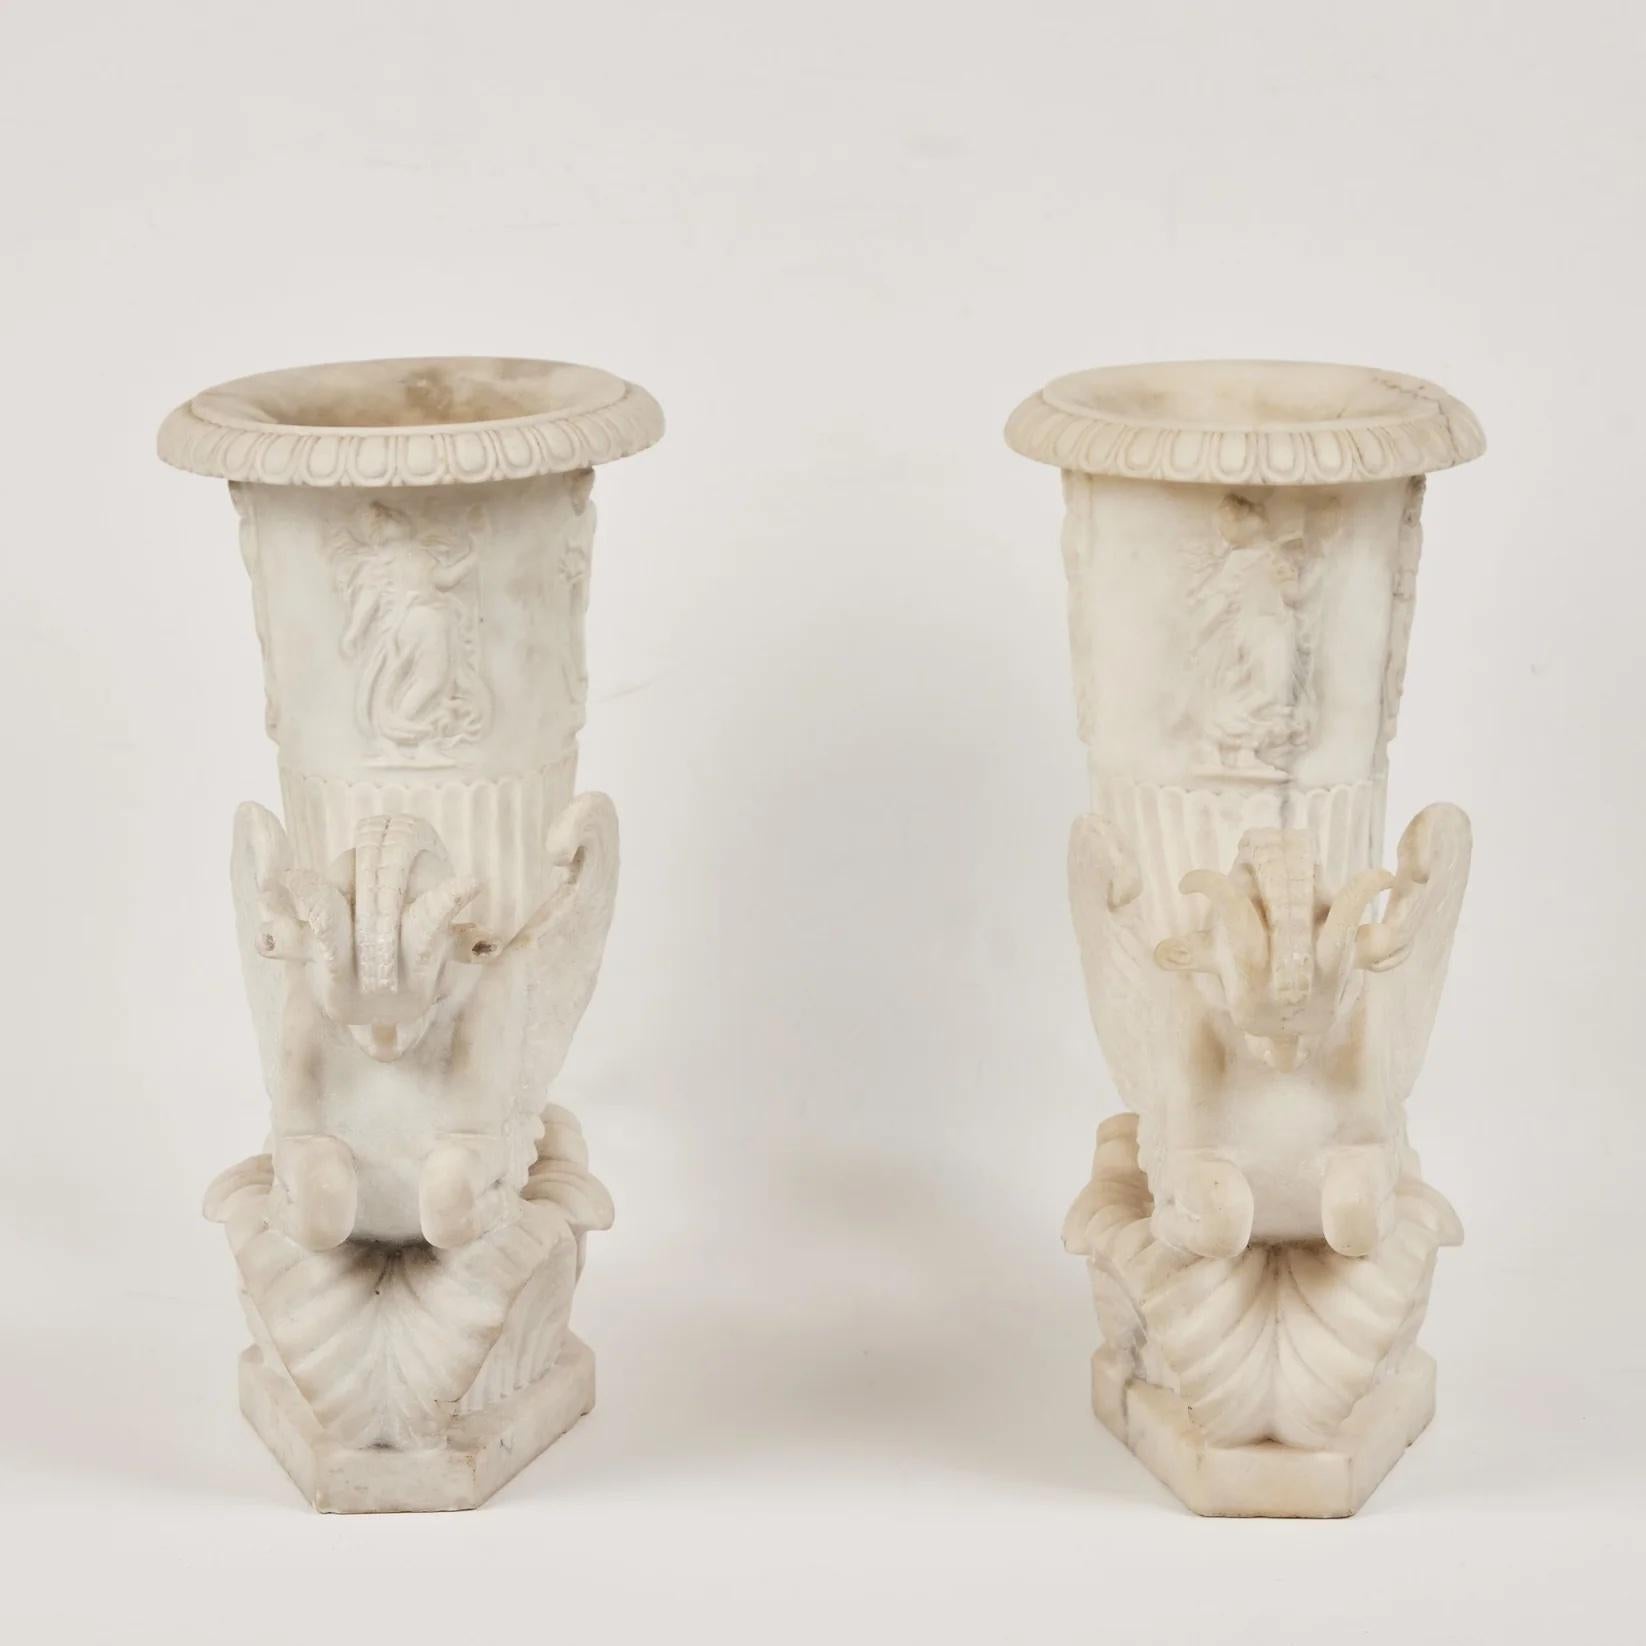 Pair of beautifully carved, left-and right, Carrara marble, winged, ram-horn hippocampus cornucopias. Each figure rising from a base of stylized, curling leaves and terminating in vases trimmed with relief-carved figures of muses or 
goddesses.  
